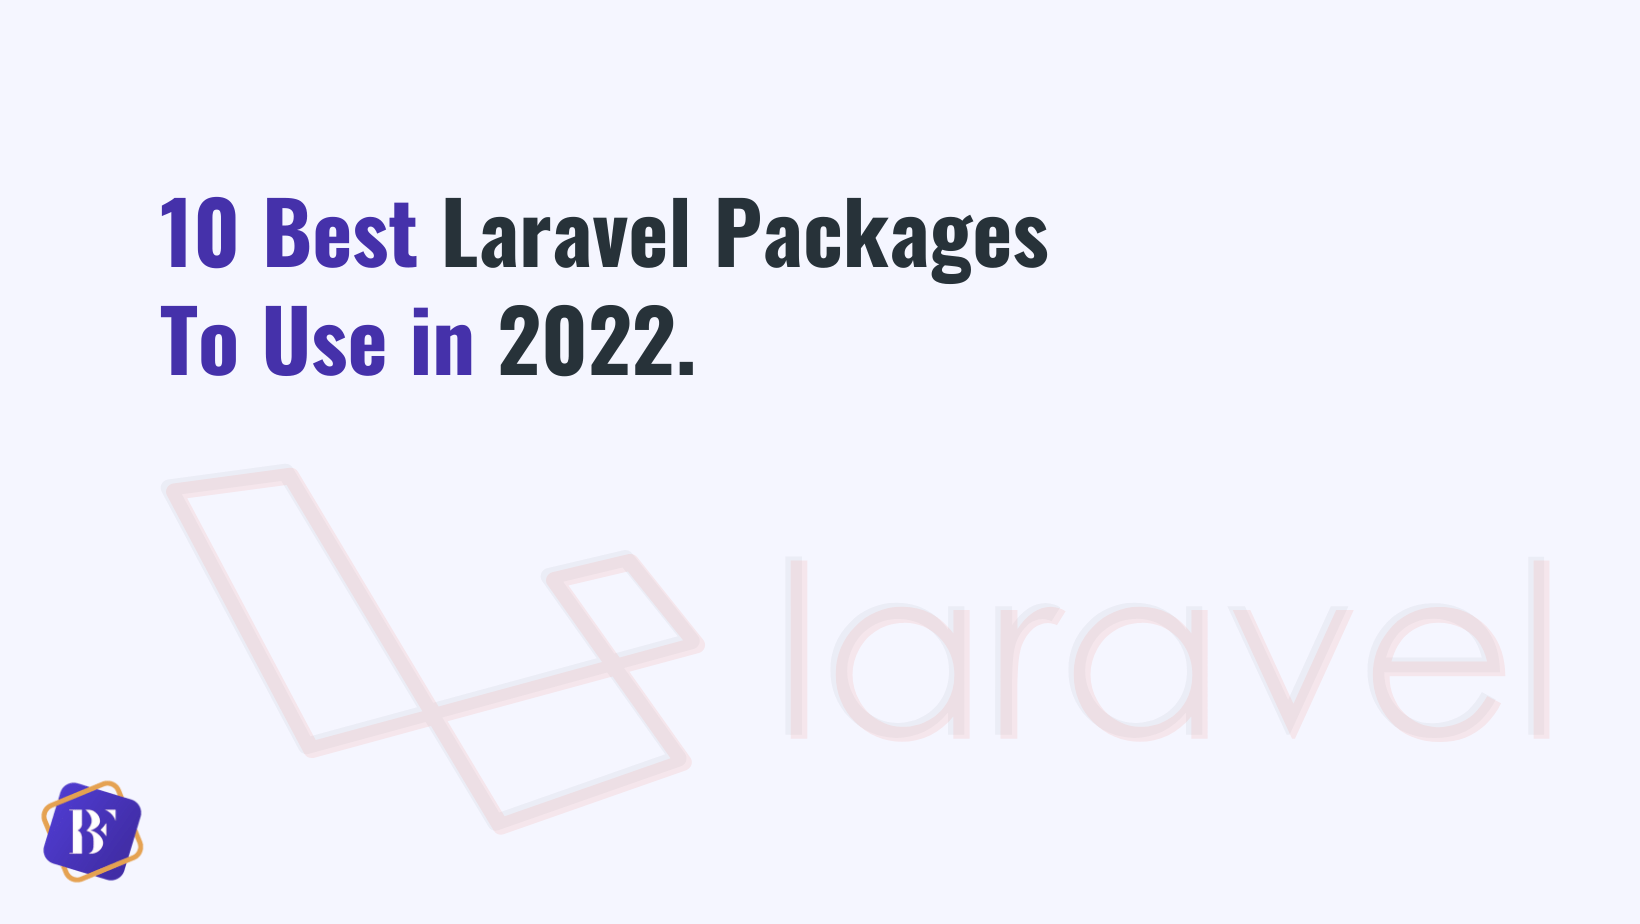 10 Best Laravel Packages To Use in 2022 from ByteFum